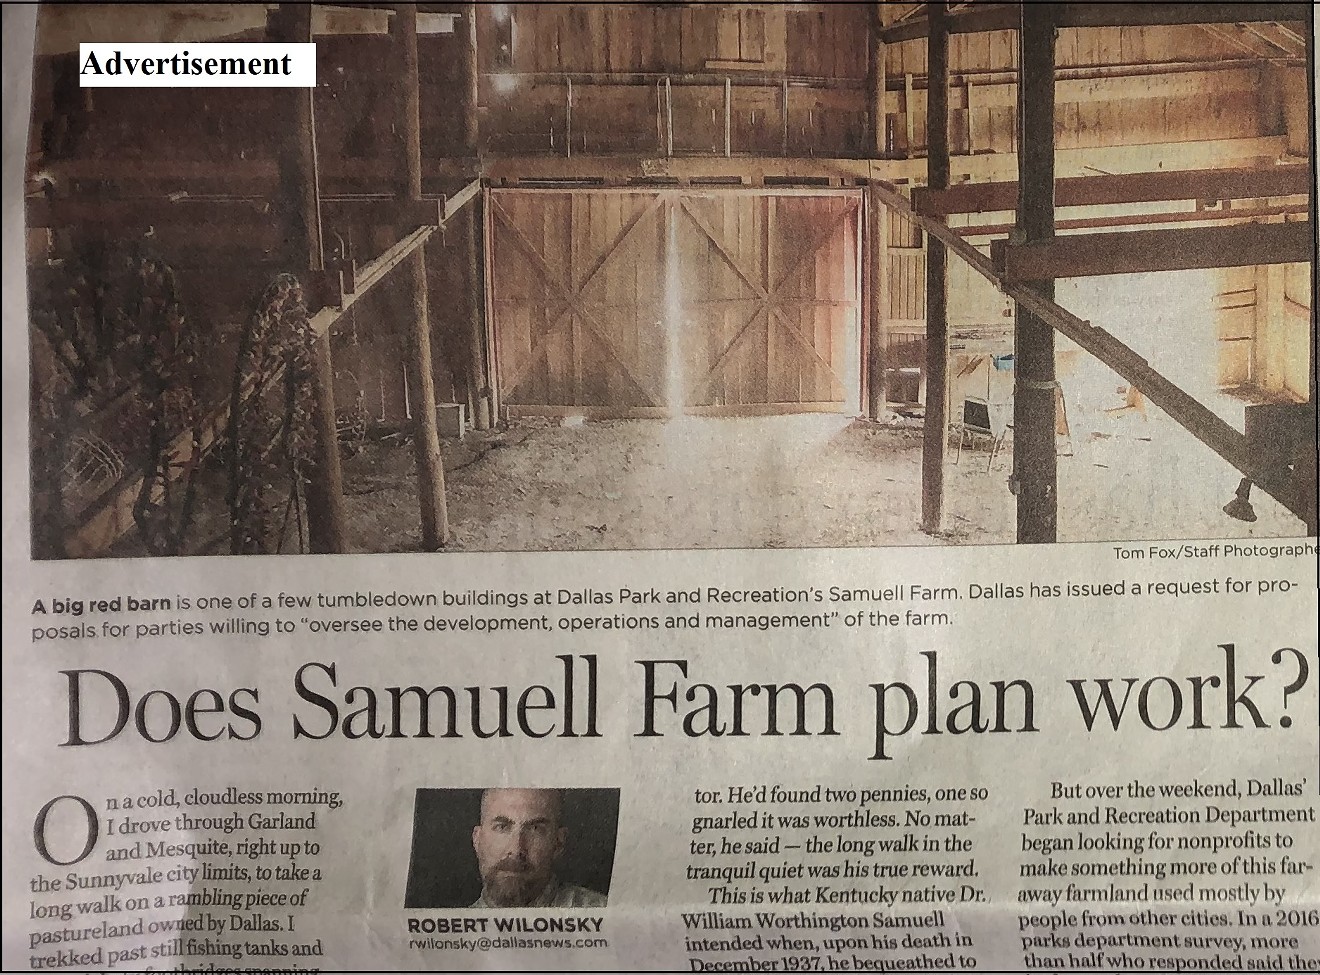 Robert Wilonsky advances an idea for Samuell Farm: Give it to this guy he knows.